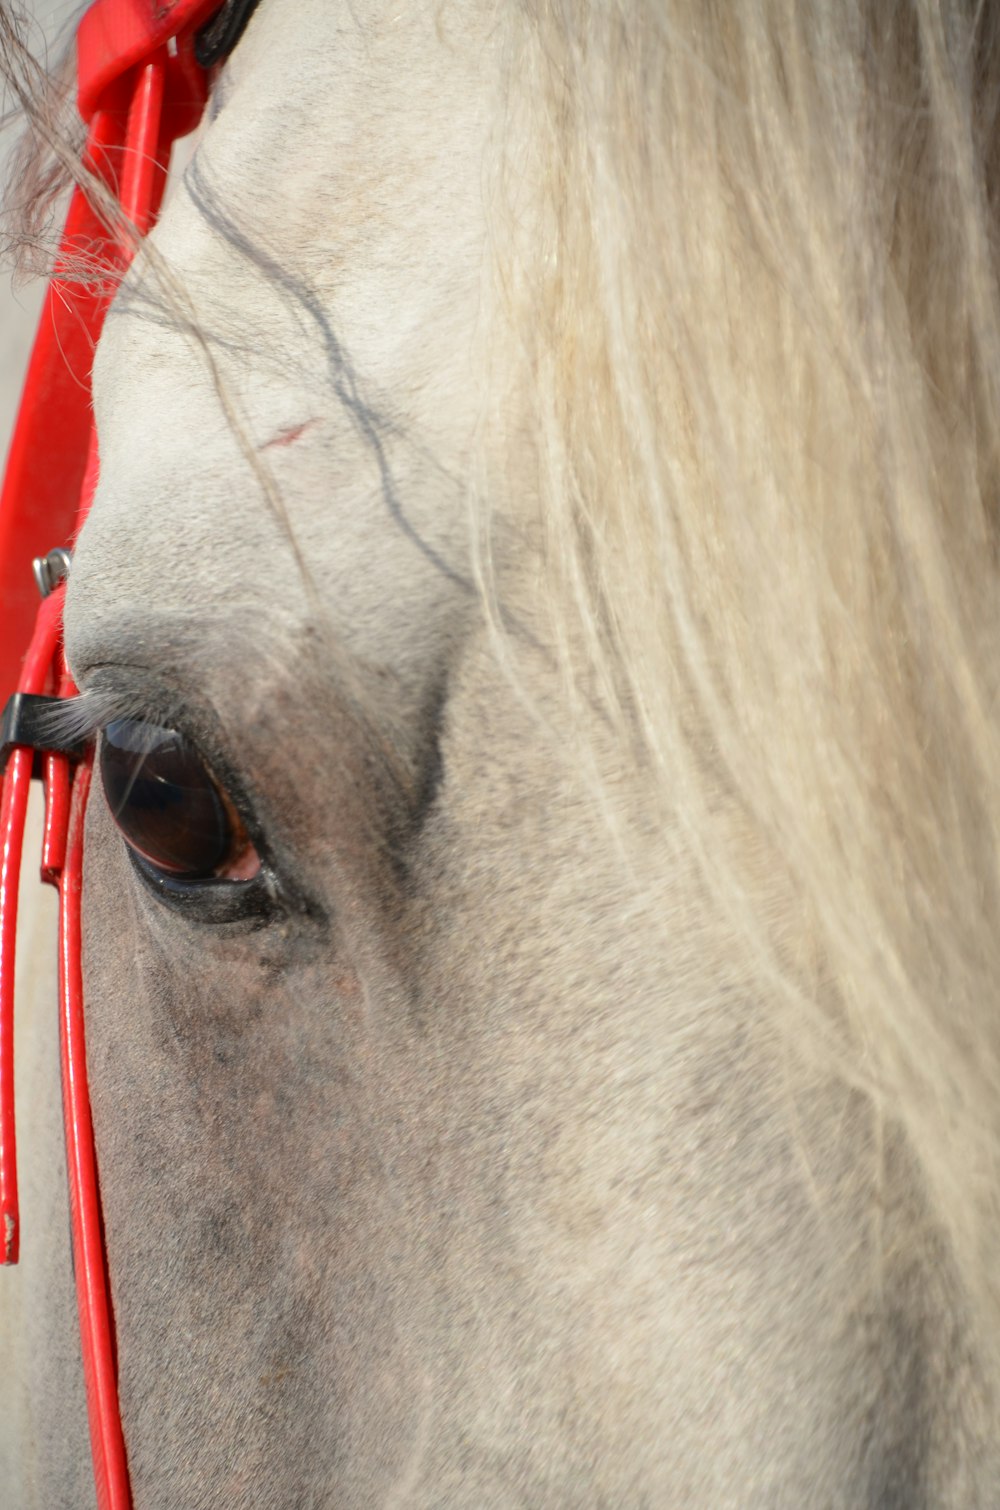 a close up of a horse with a red bridle